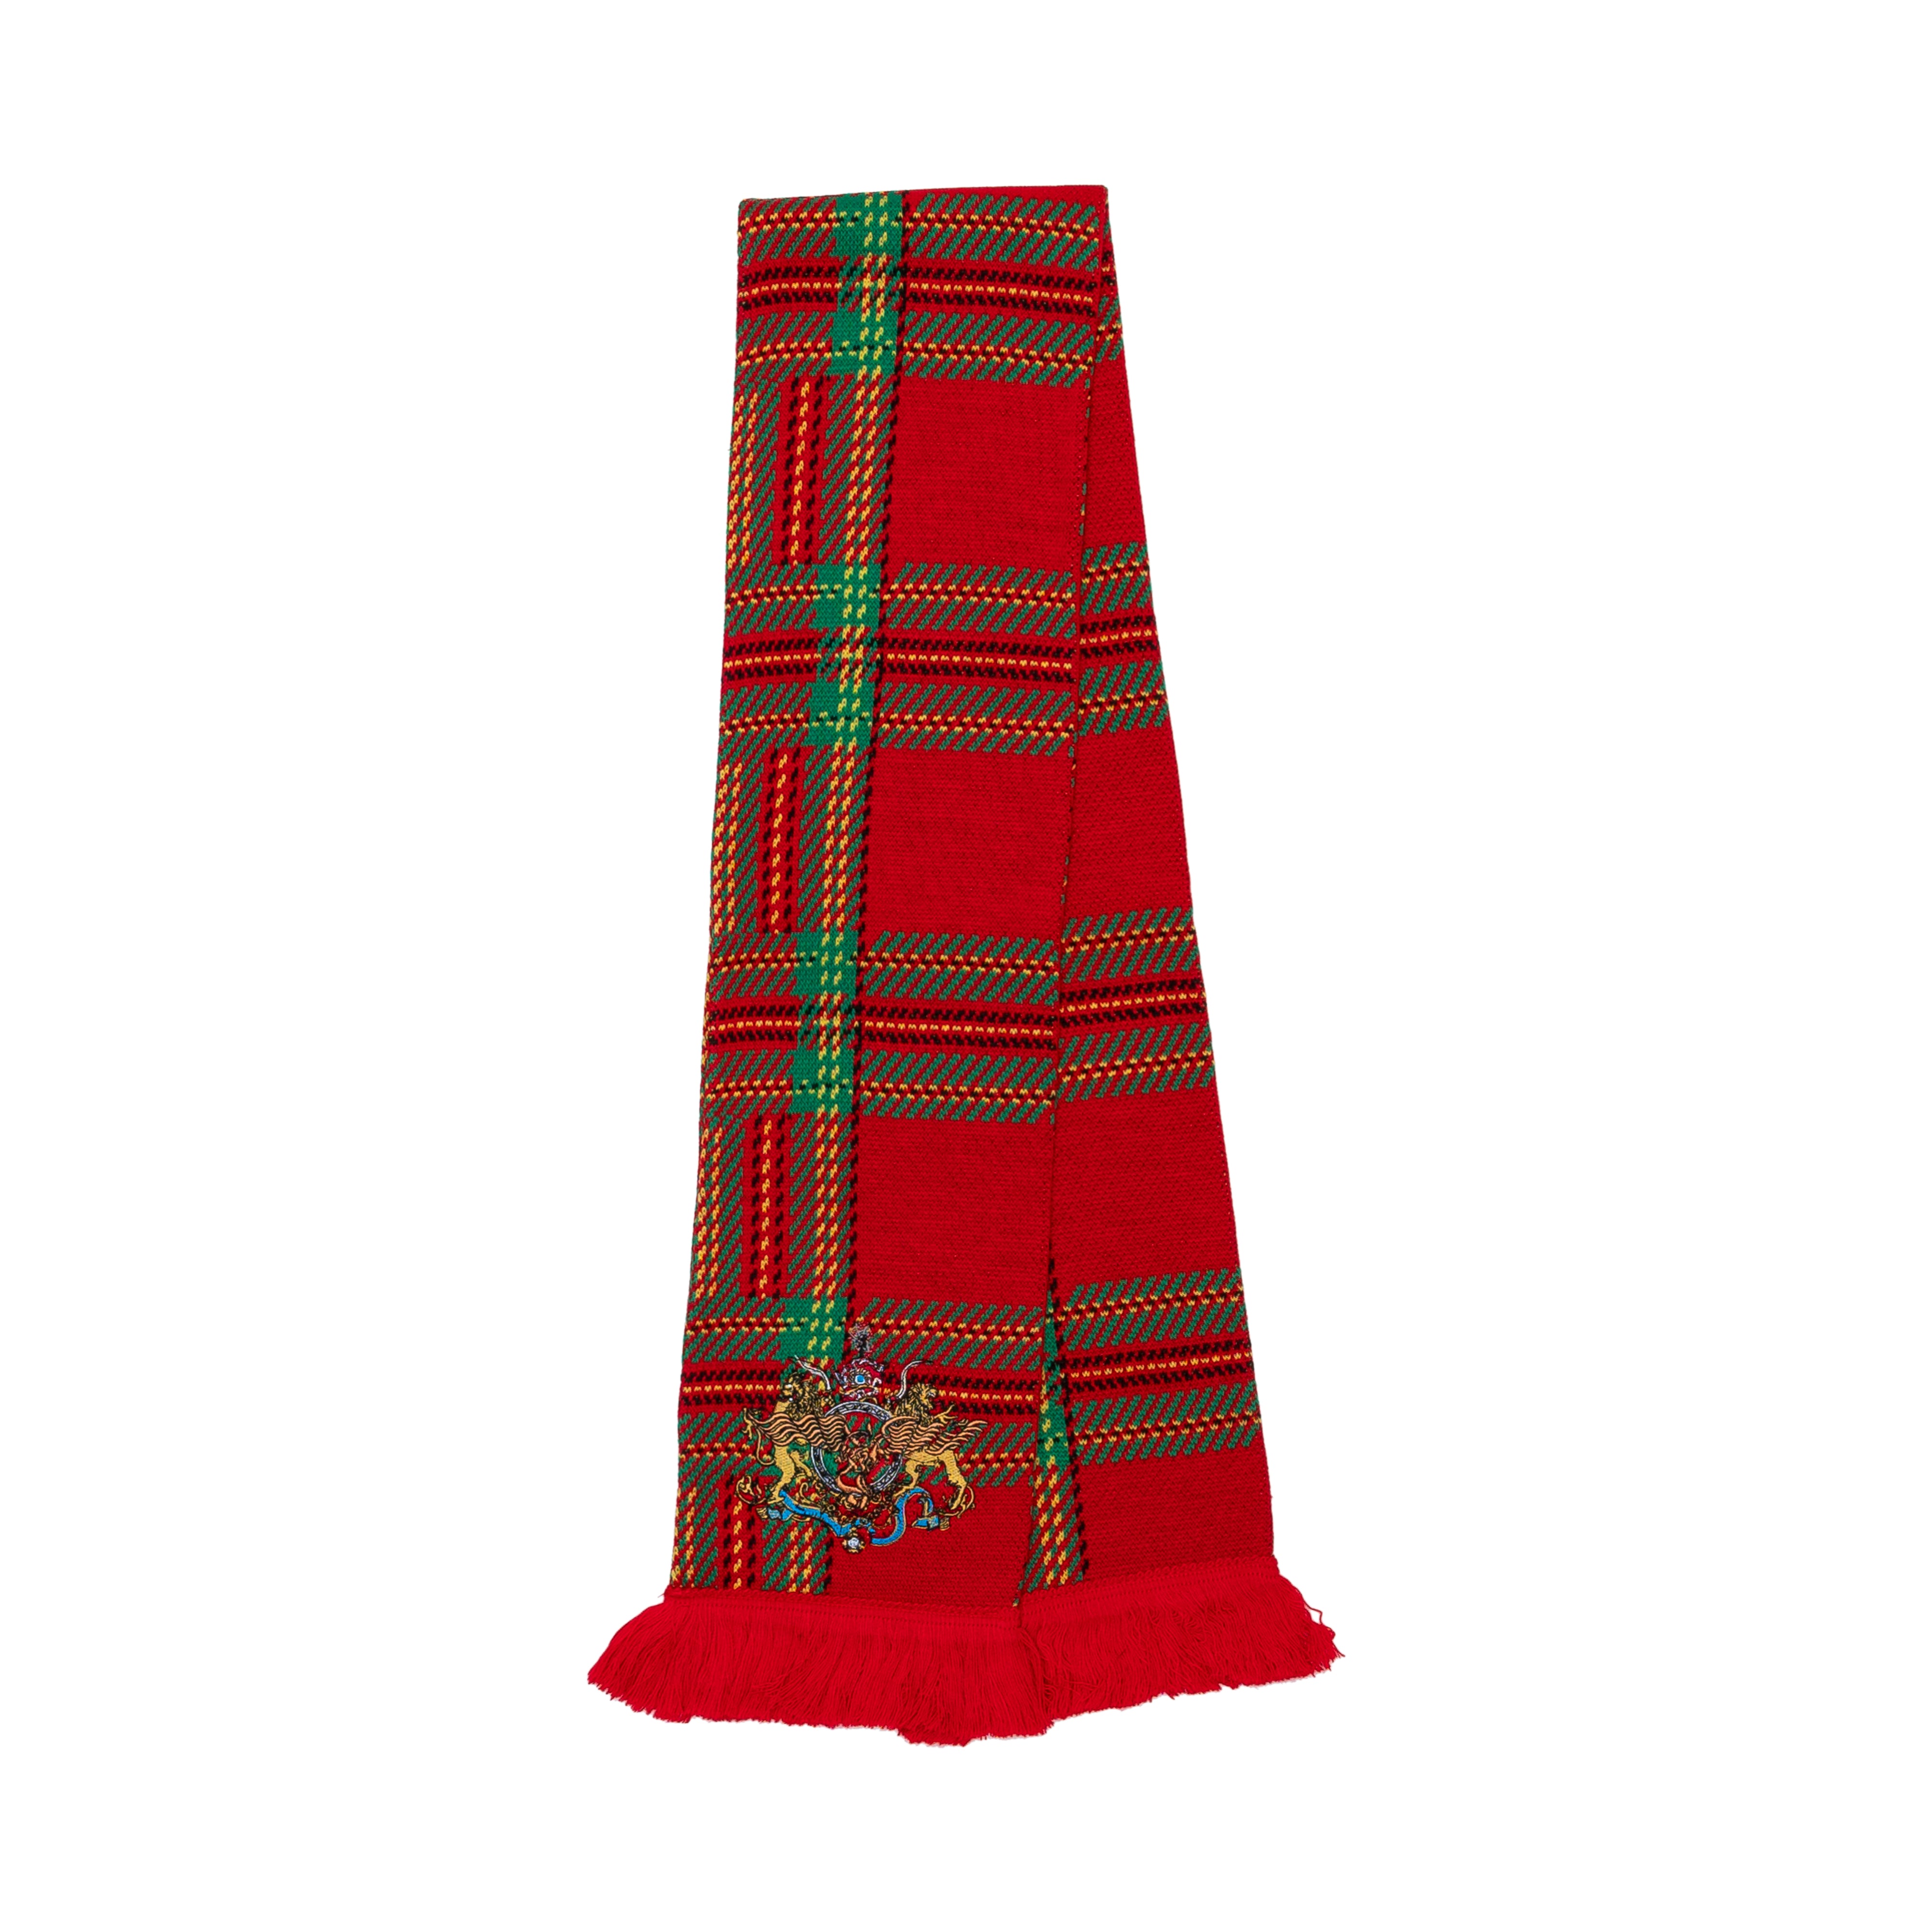 LIBERAL YOUTH MINISTRY - Men Tartan Scarf Escudo Embroidery - Knit 